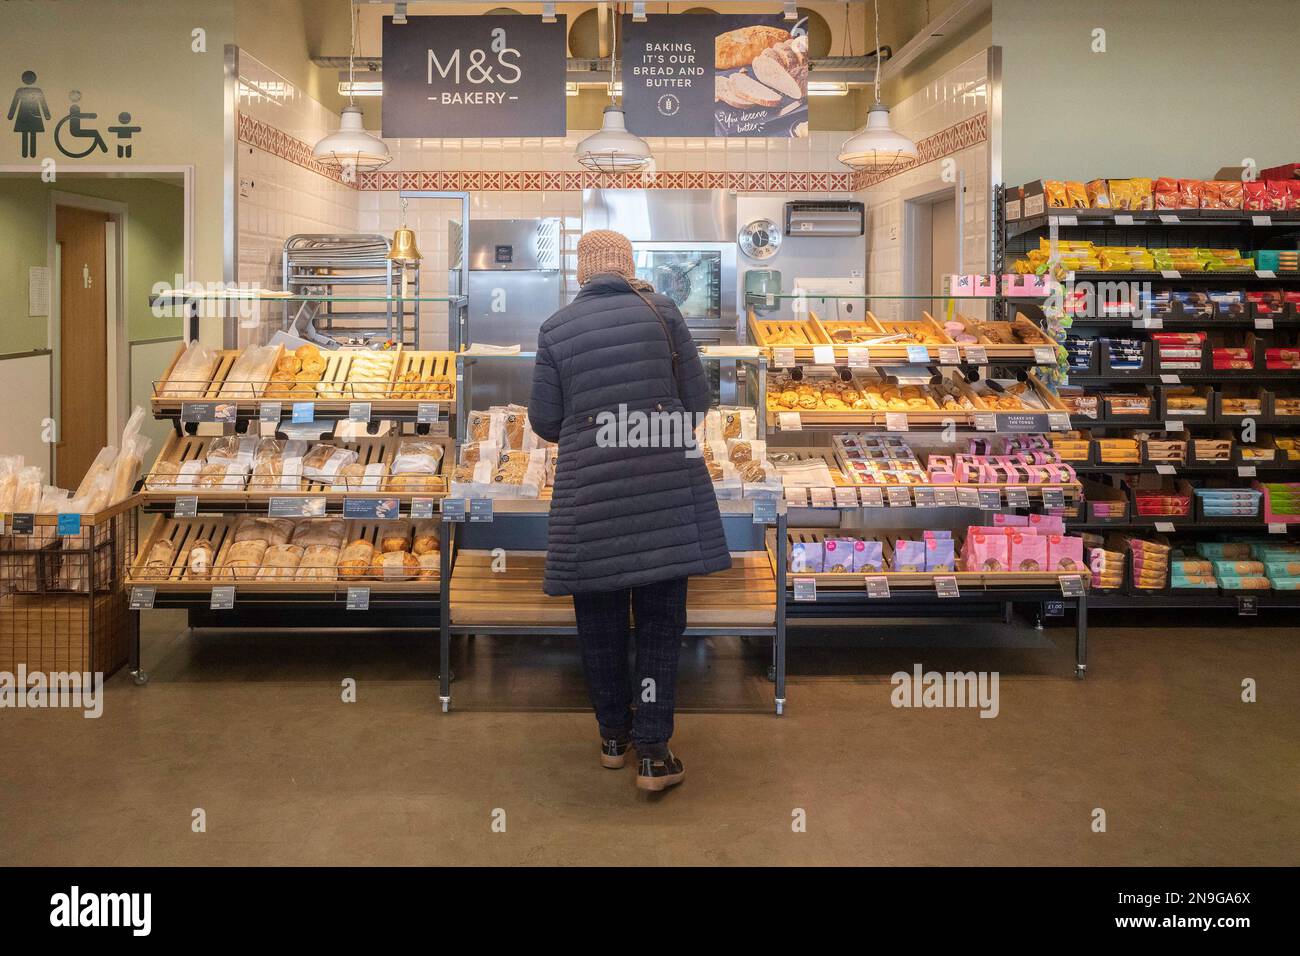 Woman OAP Shopping in einer Marks and Spencer Simply Food Supermarket Bakery Stockfoto